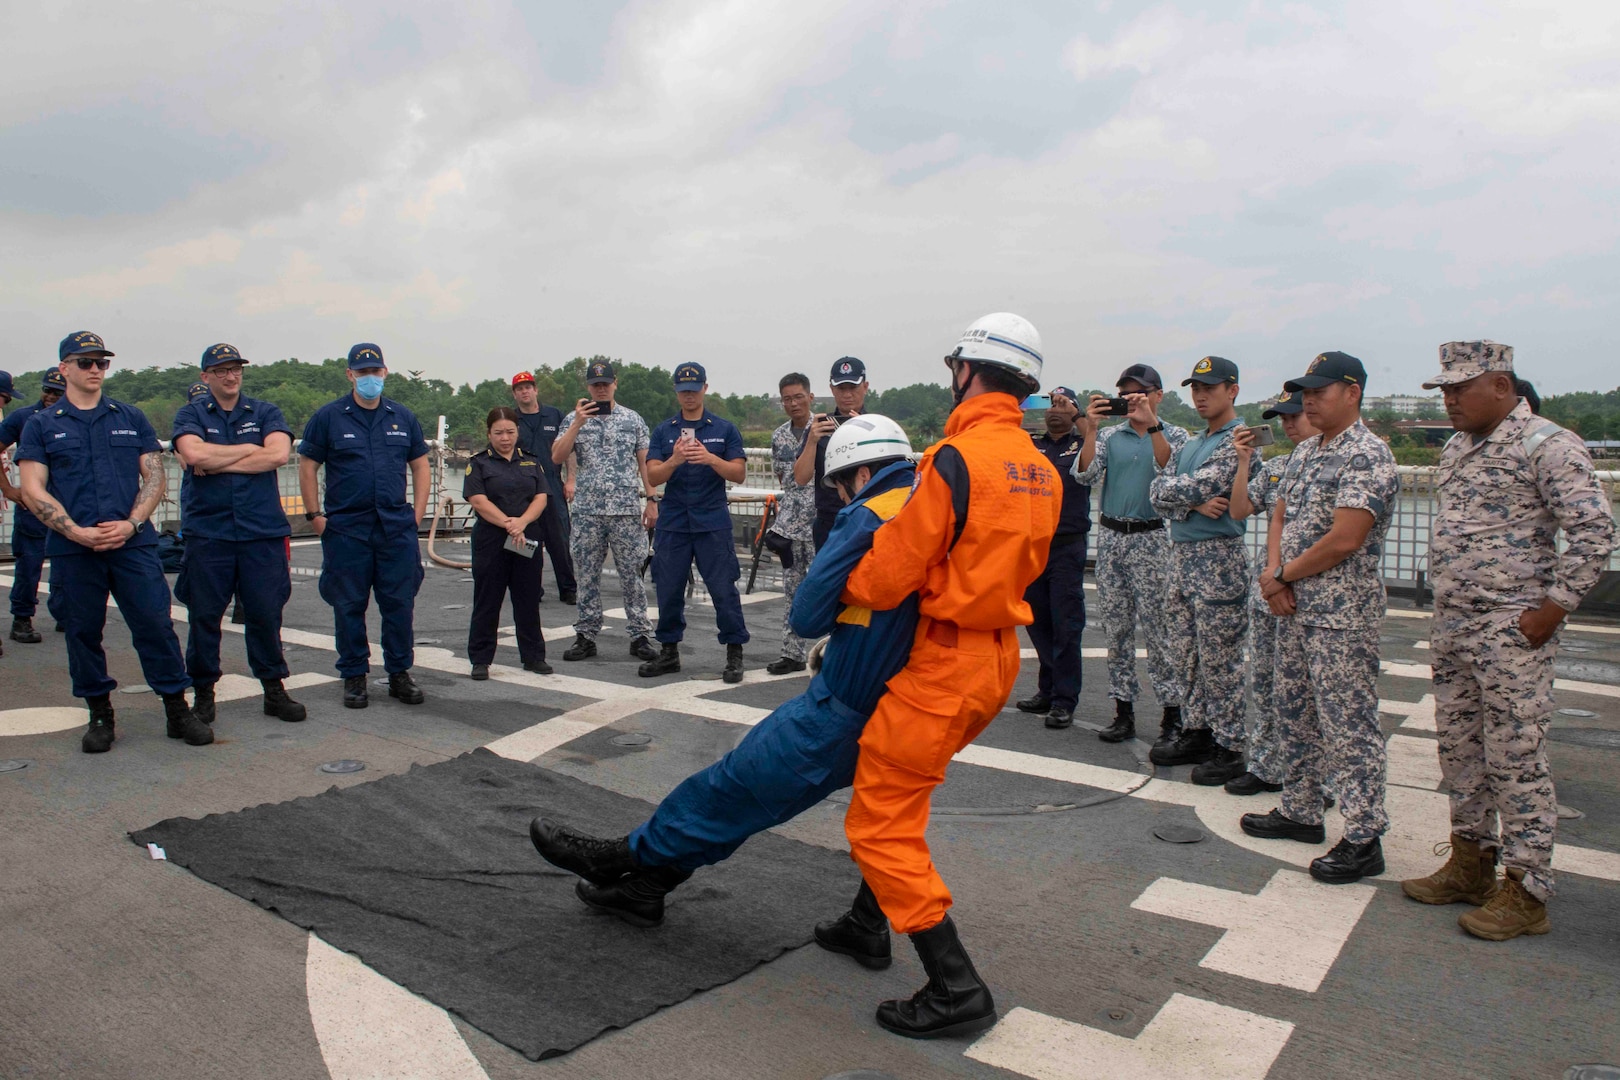 Members of the Japanese Coast Guard give tactical training on how to move a body during a subject matter exchange to members of the Republic of Singapore Navy, members of the Singapore Police Coast Guard, members of the Malaysia Maritime Enforcement Agency, and Sailors onboard U.S. Coast Guard Cutter Bertholf (WMSL 750), March 3. Bertholf was in Malaysia for a multiple day engagement to engage in professional subject matter exchanges with regional partners and allies and will patrol and operate as directed during their Western Pacific deployment. (U.S. Navy photo taken by Mass Communication Specialist 3rd Class Charlotte Duran)